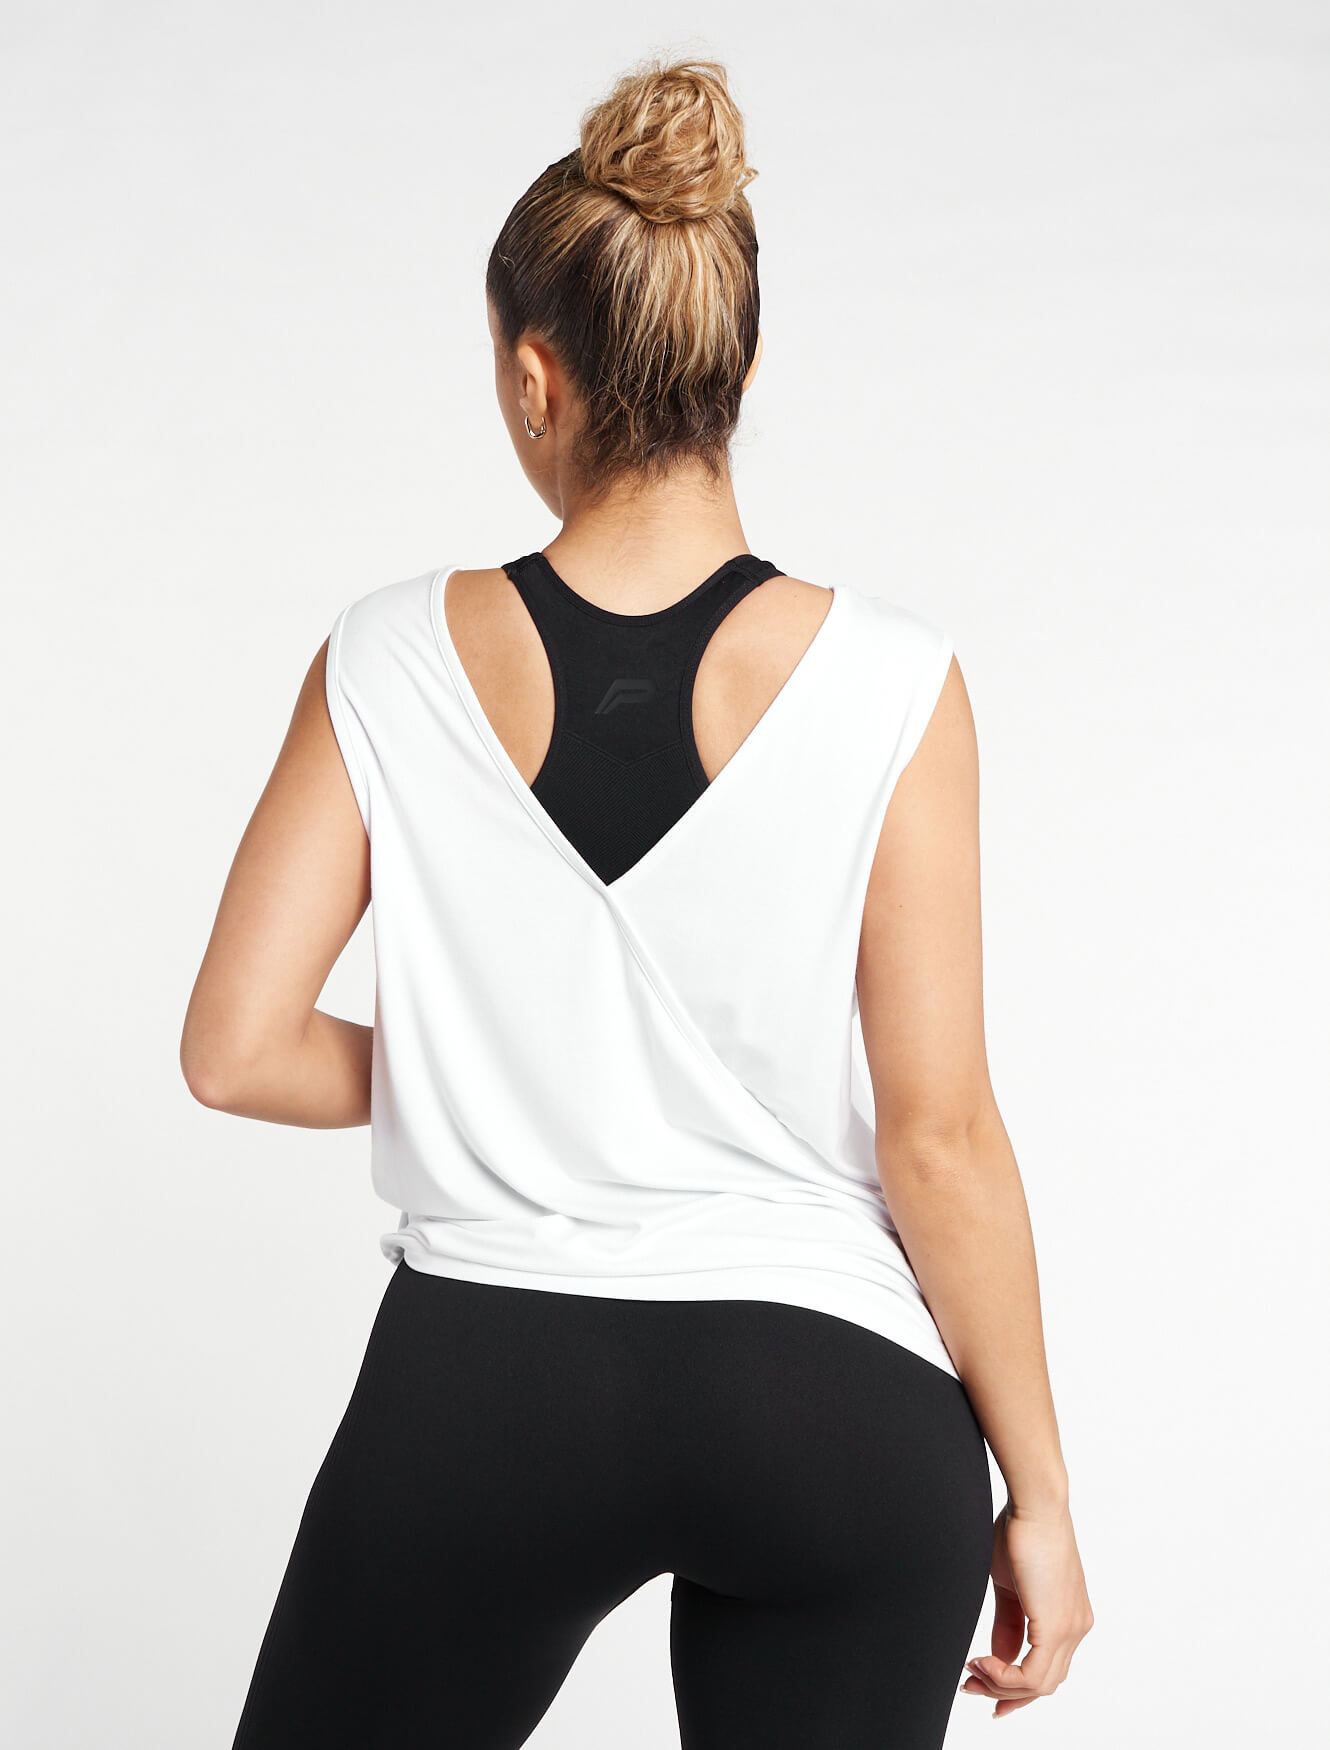 Crossover Tank Top / White Pursue Fitness 2